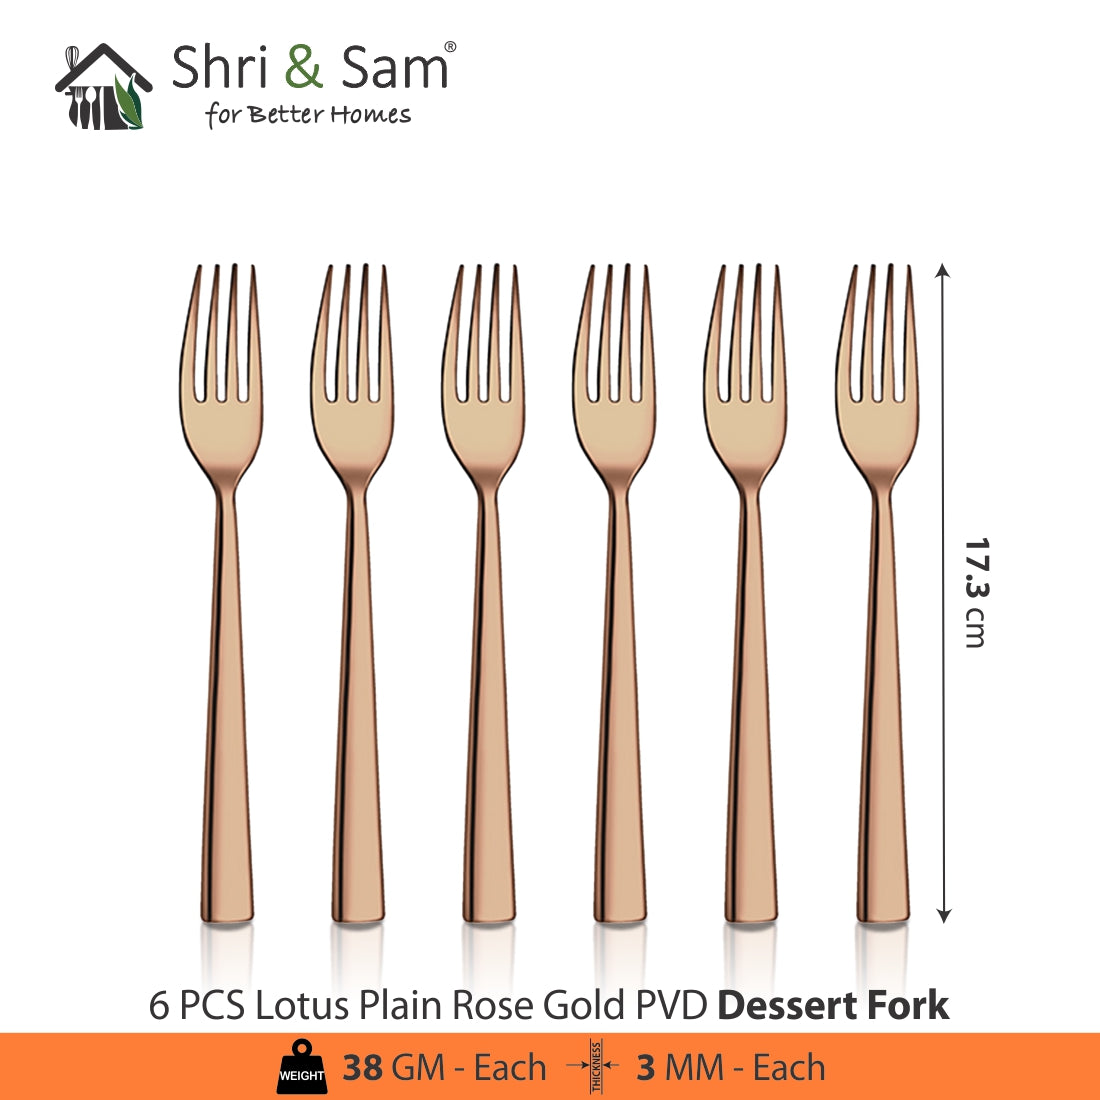 Stainless Steel Cutlery with Rose Gold PVD Coating Lotus Plain